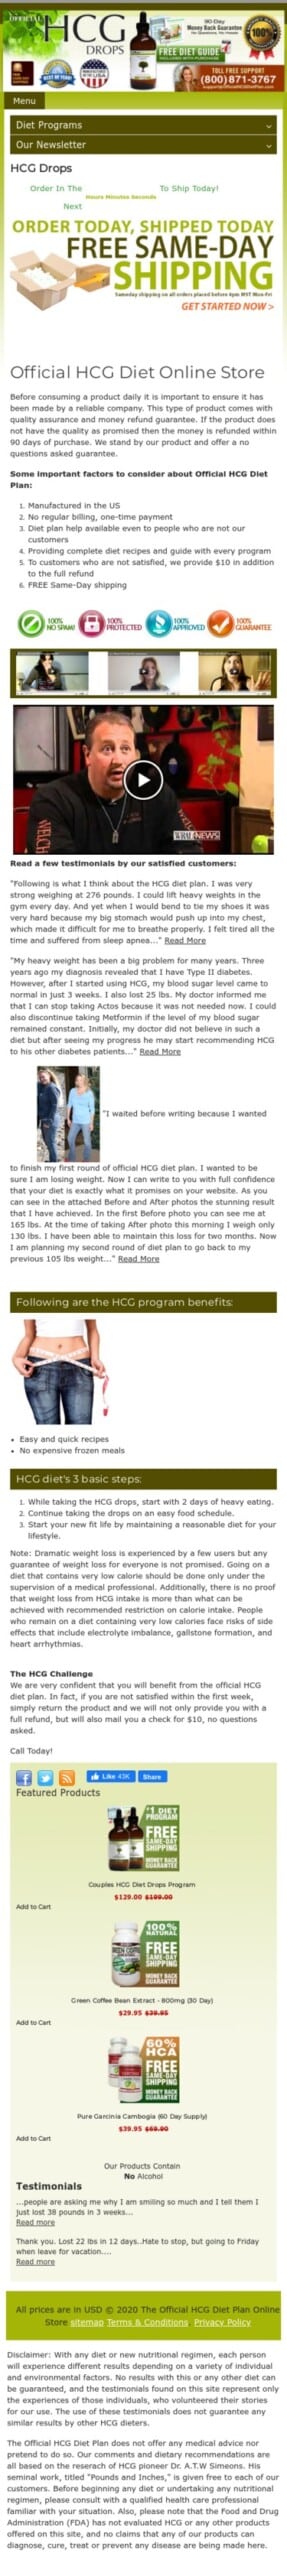 official hcg diet plan Coupon